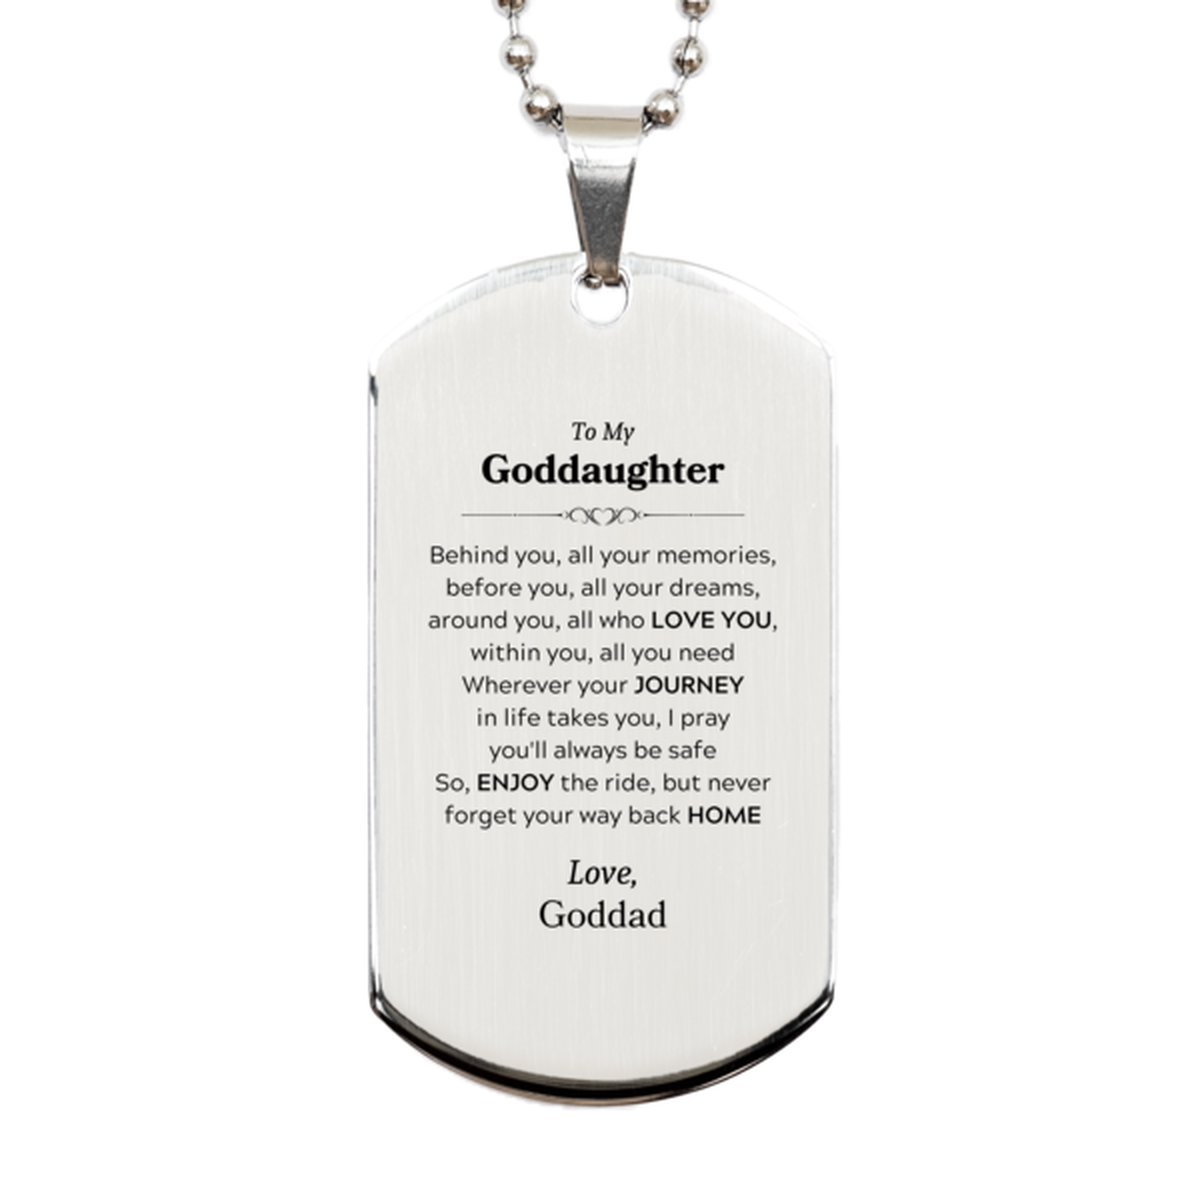 To My Goddaughter Graduation Gifts from Goddad, Goddaughter Silver Dog Tag Christmas Birthday Gifts for Goddaughter Behind you, all your memories, before you, all your dreams. Love, Goddad